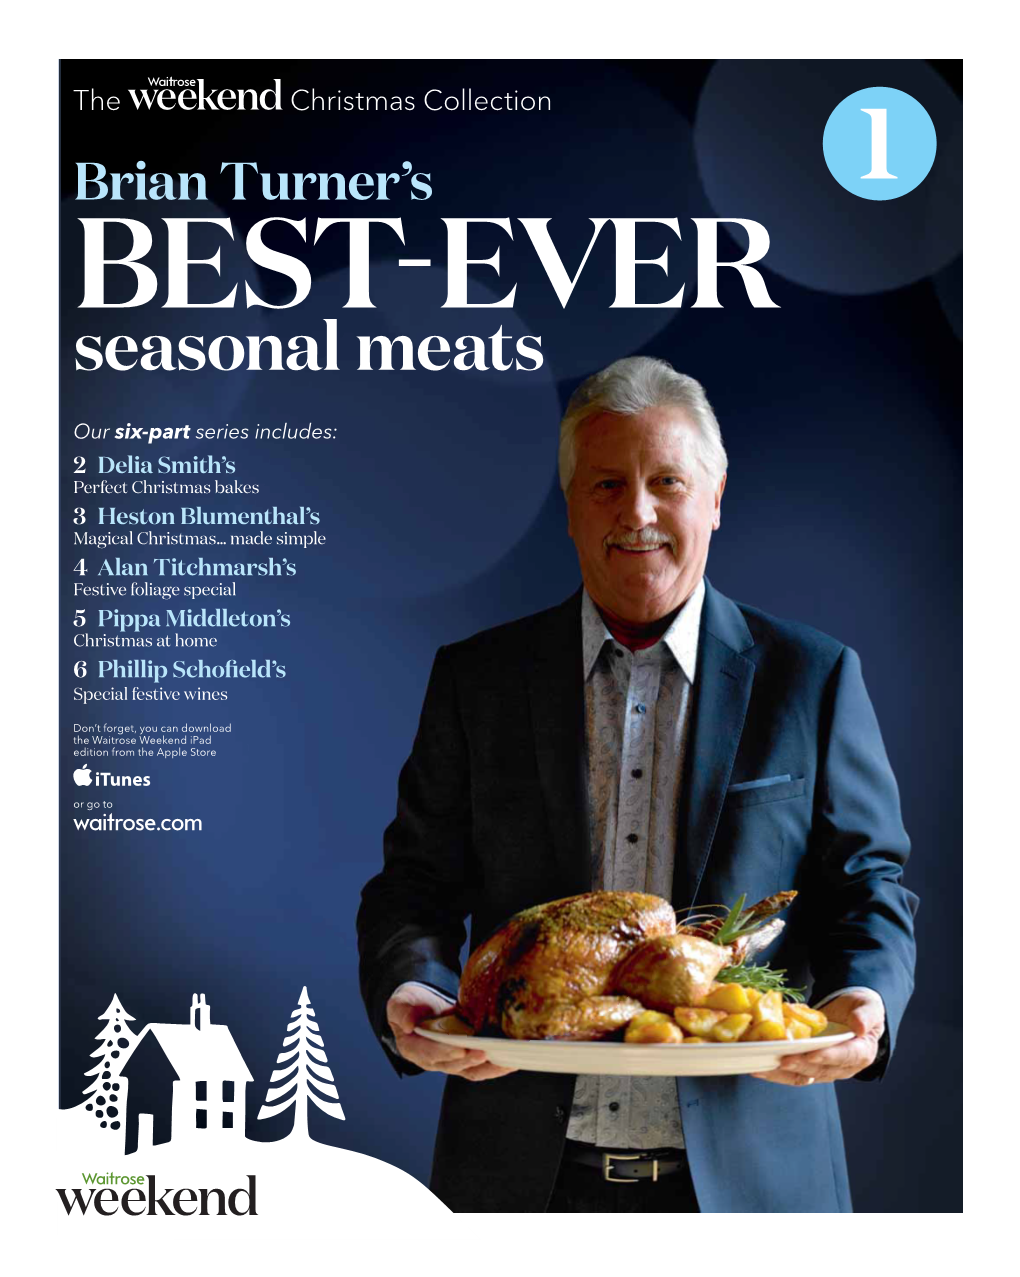 You Can Download a Pdf of This Special Edition of Waitrose